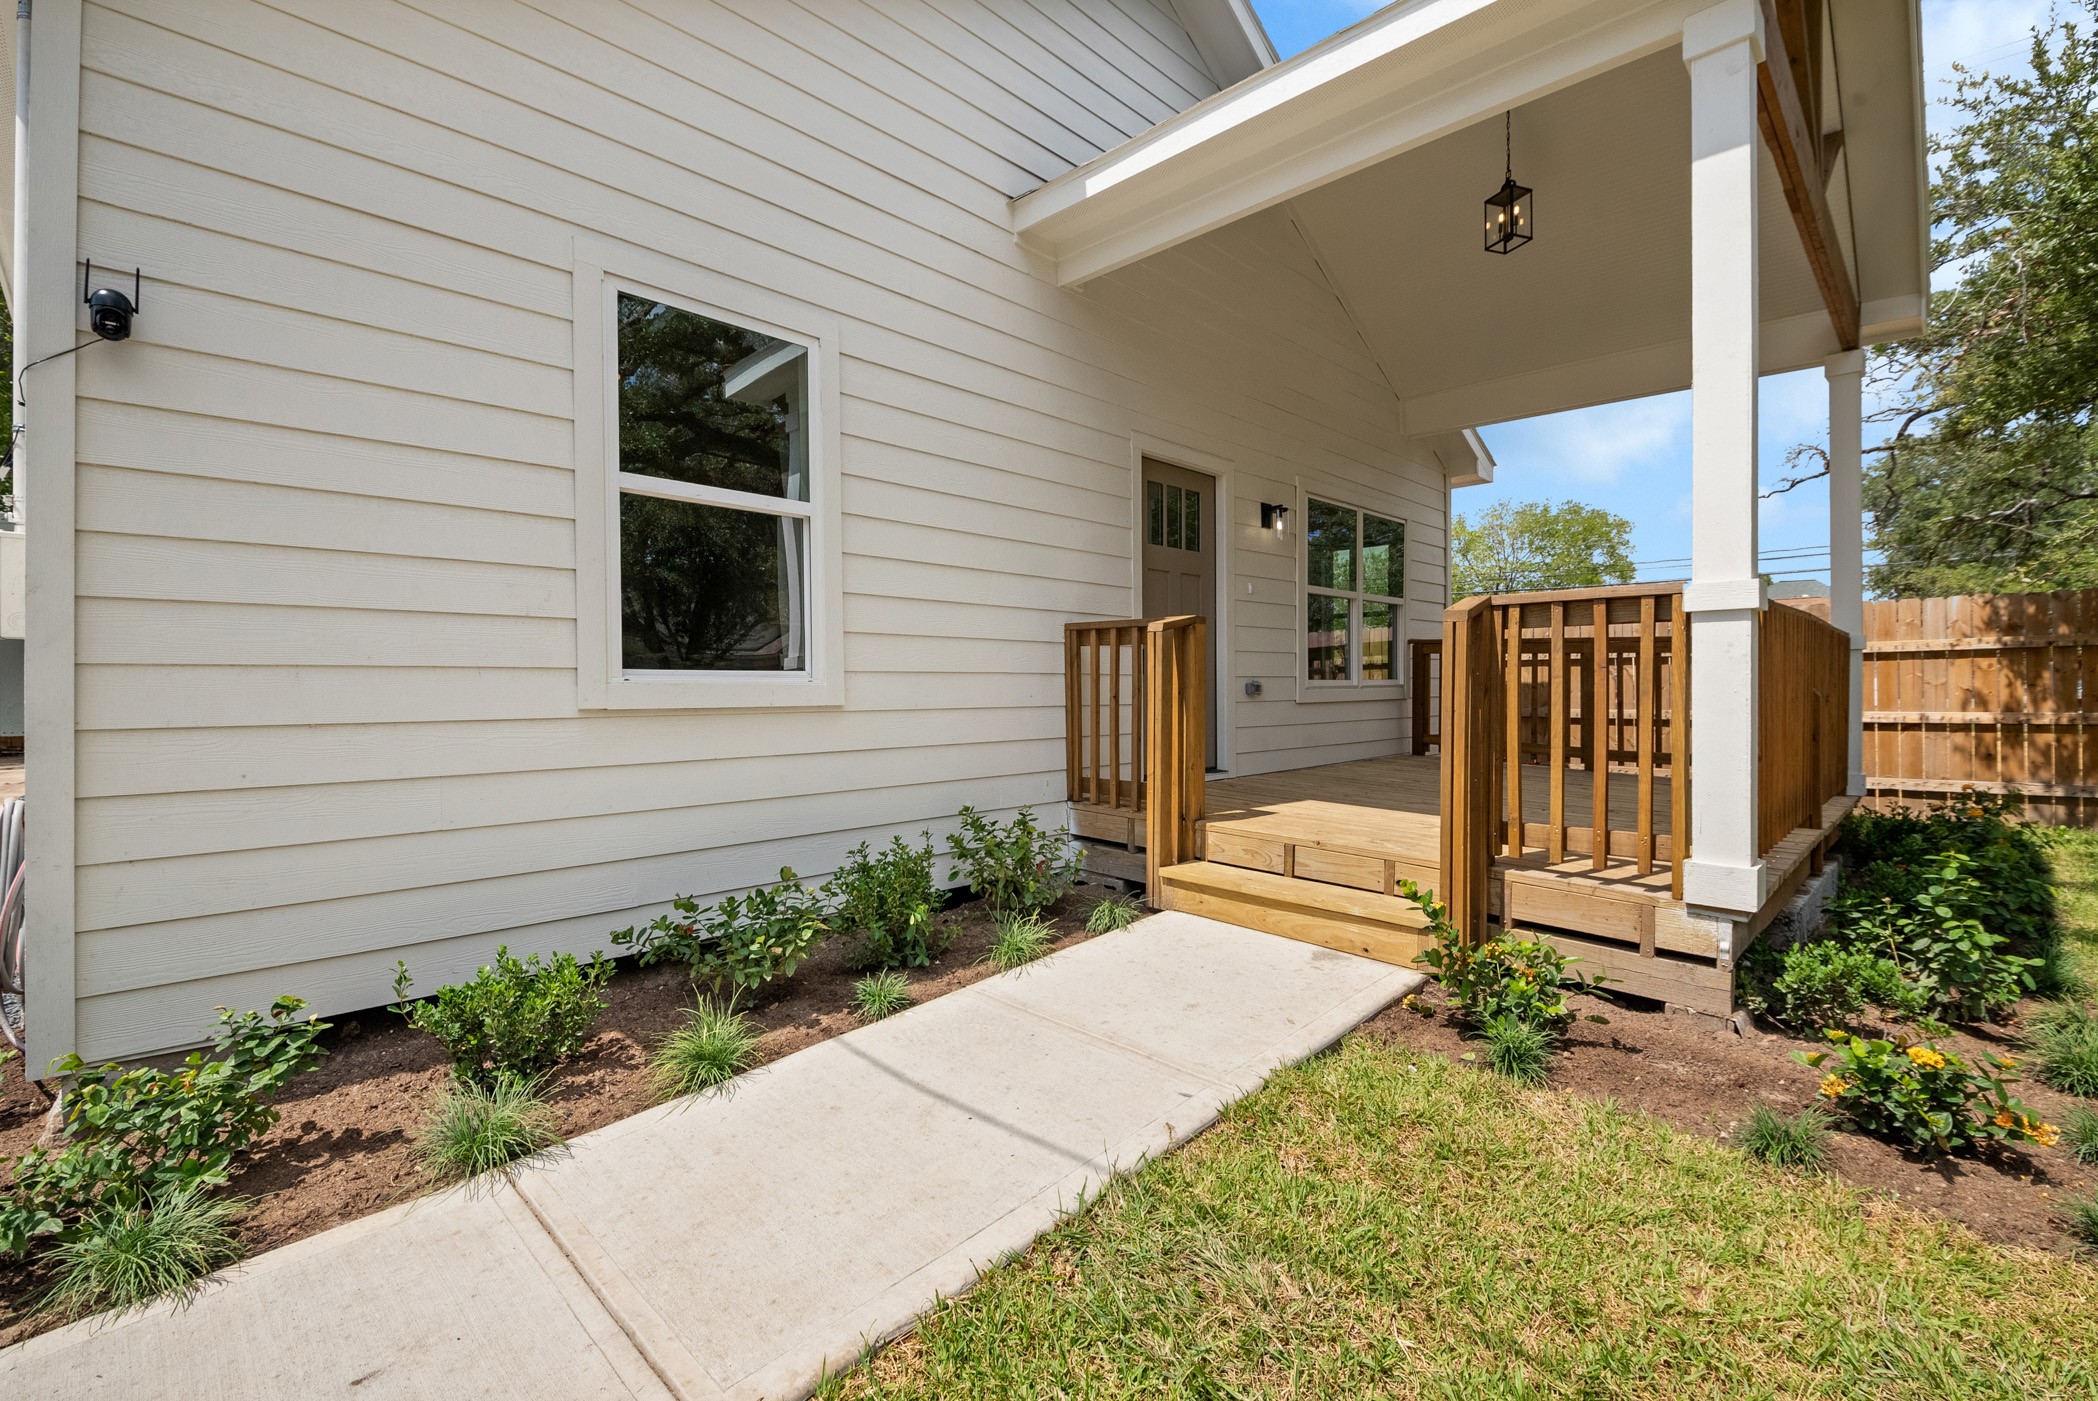 Take a stroll down your private walkway onto this fabulous front porch. What a stunning way to greet people when you have your first holiday party!